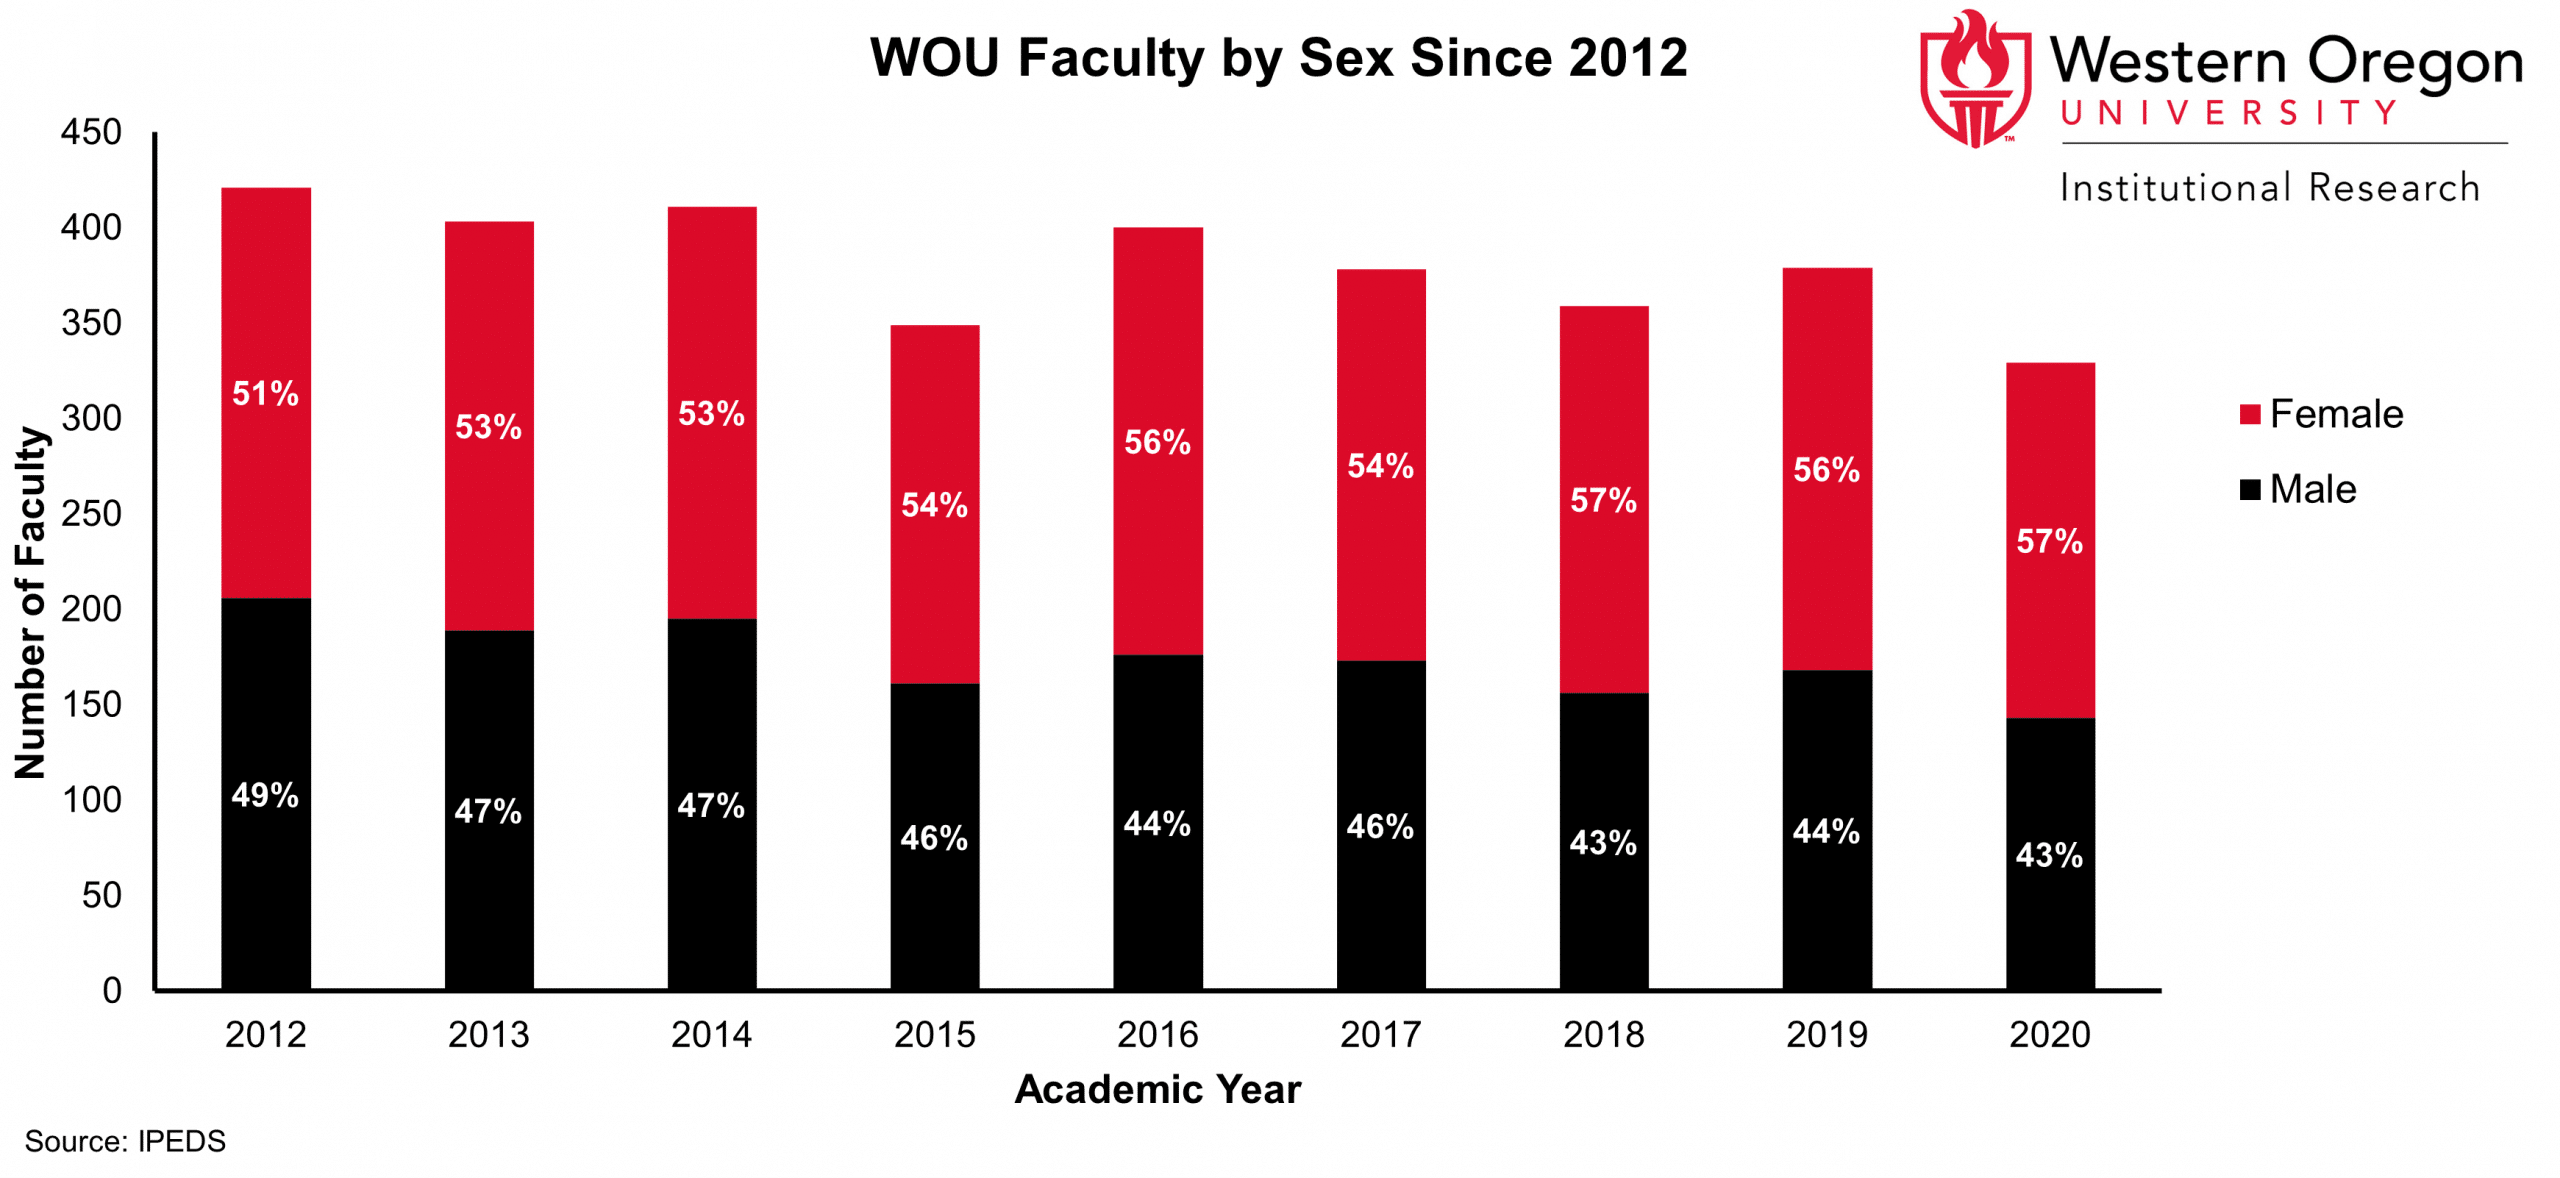 Total faculty and faculty by sex since 2012